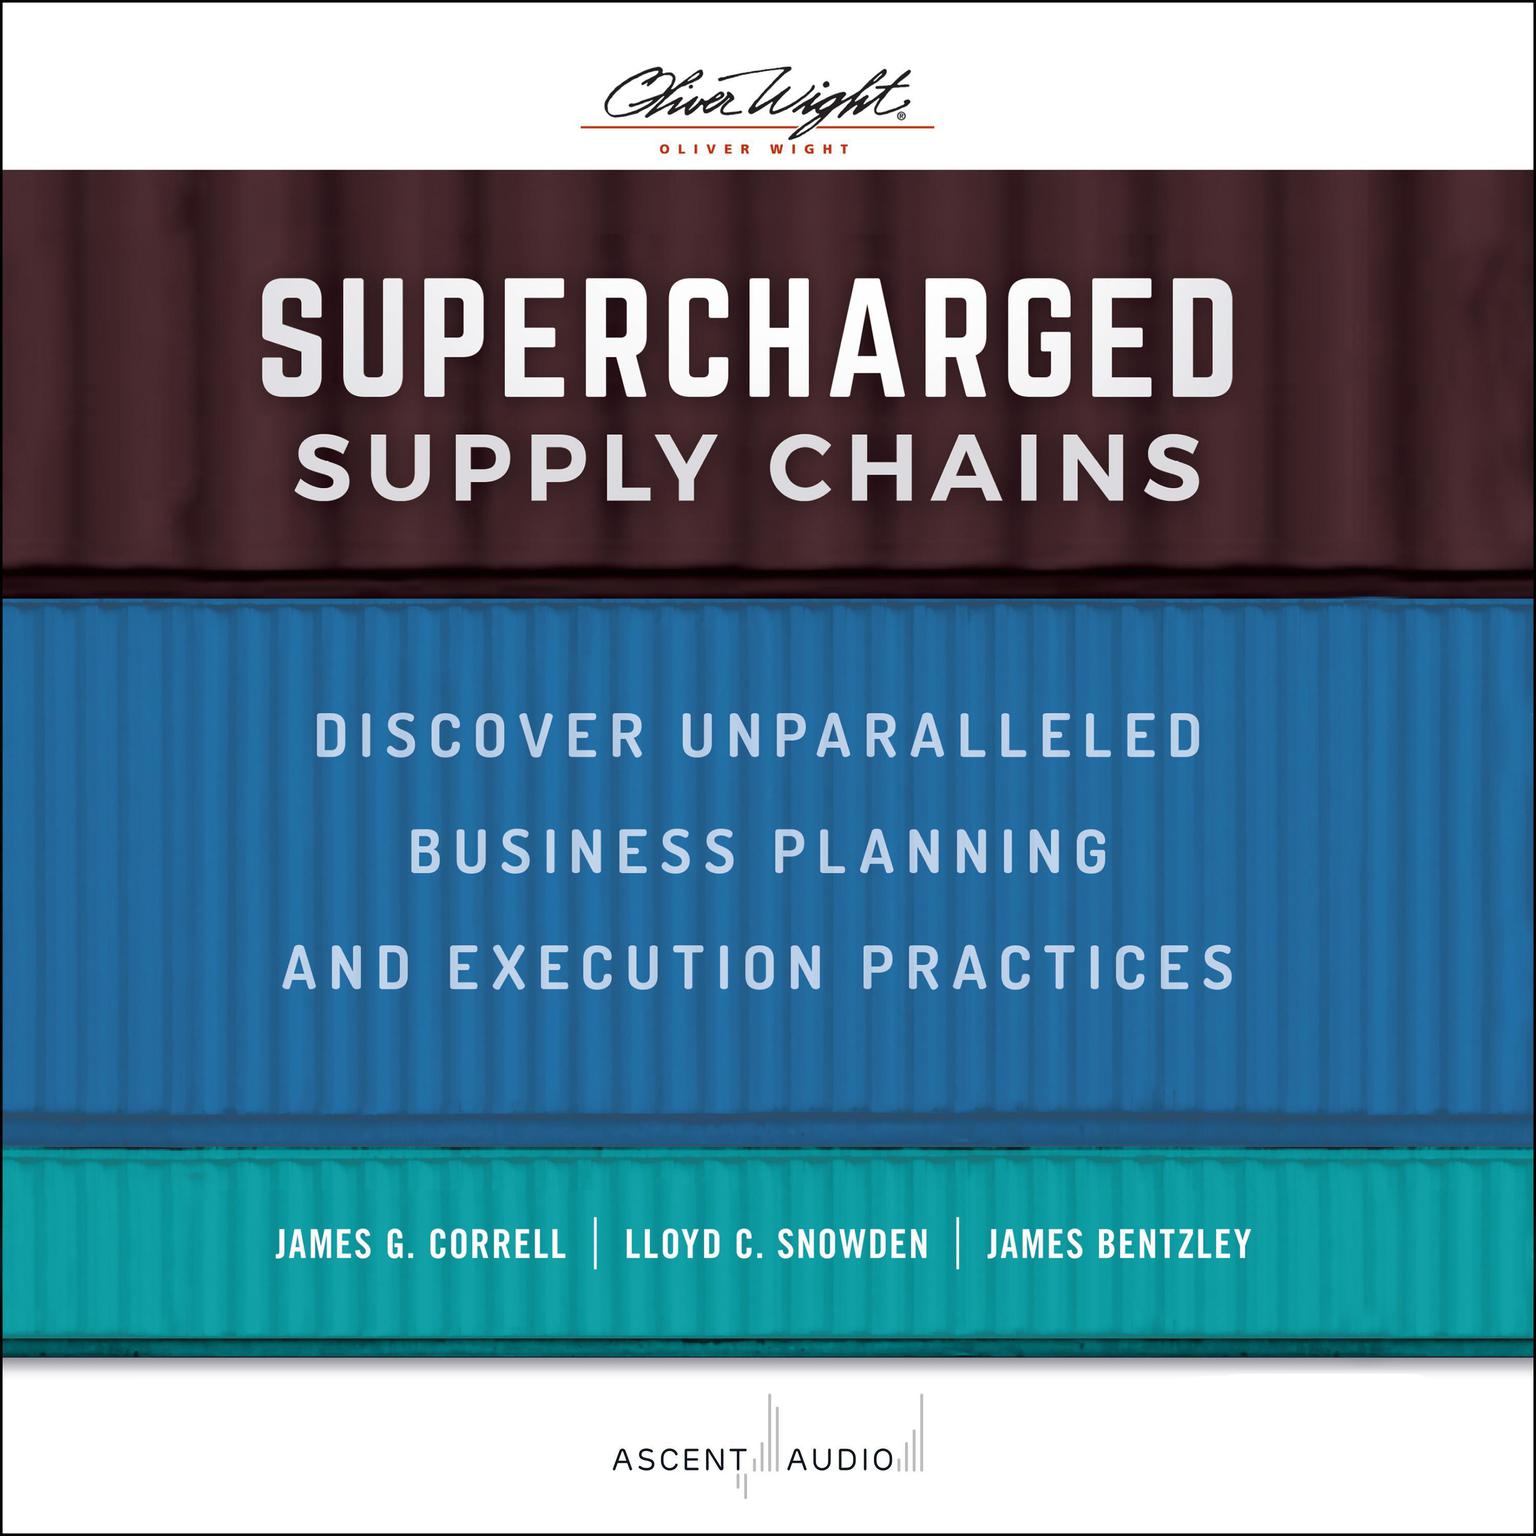 Supercharged Supply Chains: Discover Unparalleled Business Planning and Execution Practices Audiobook, by James G. Correll